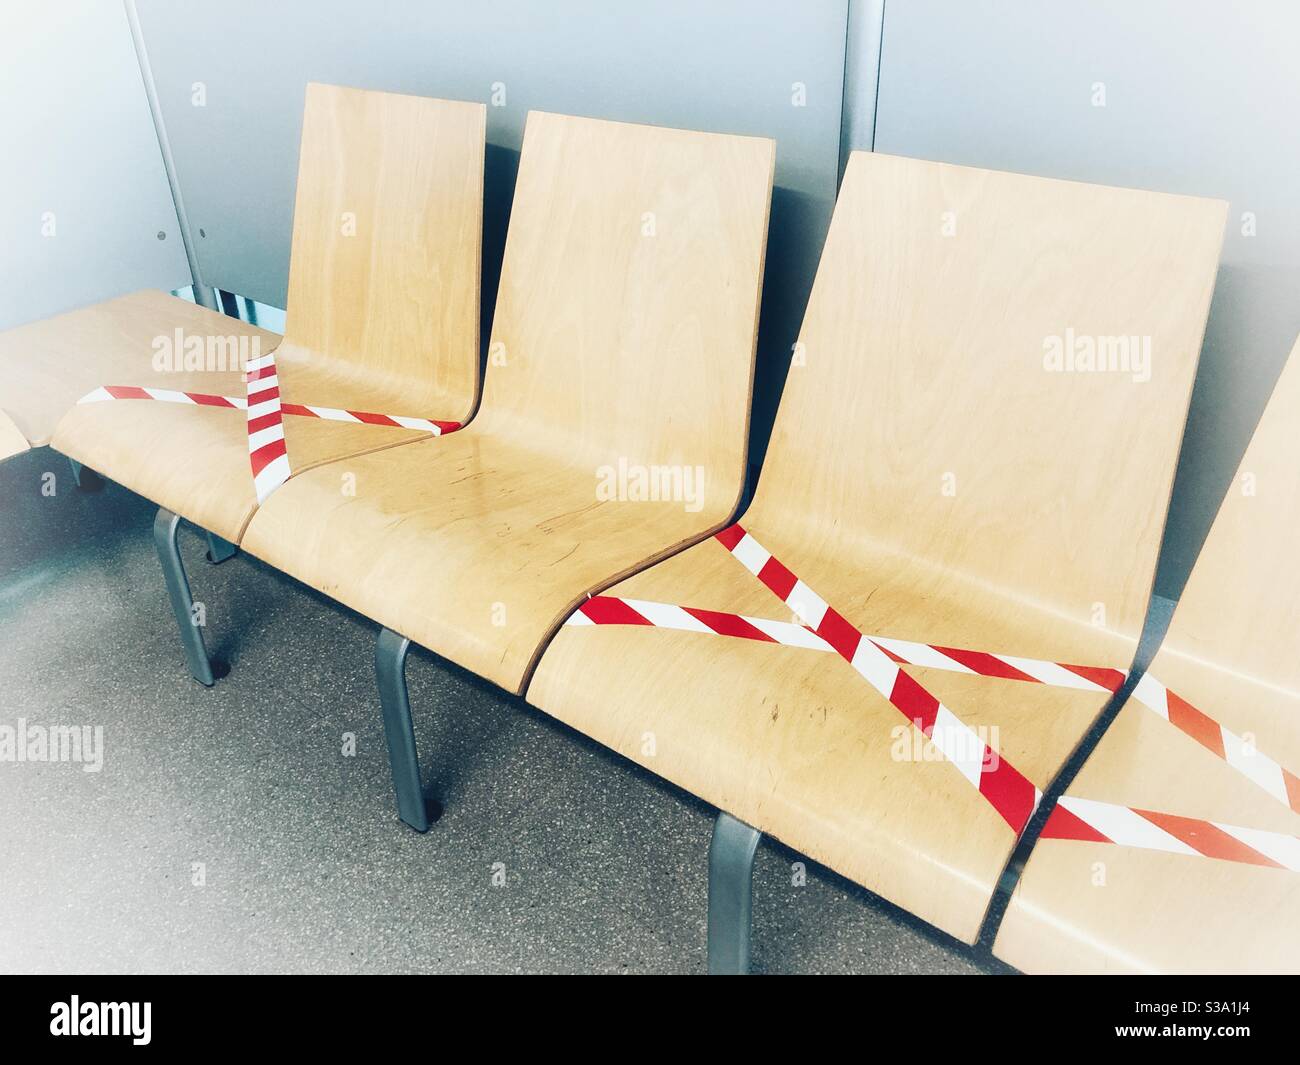 Empty seats at public area with a warning to keep the social distance during the COVID-19 pandemic Stock Photo